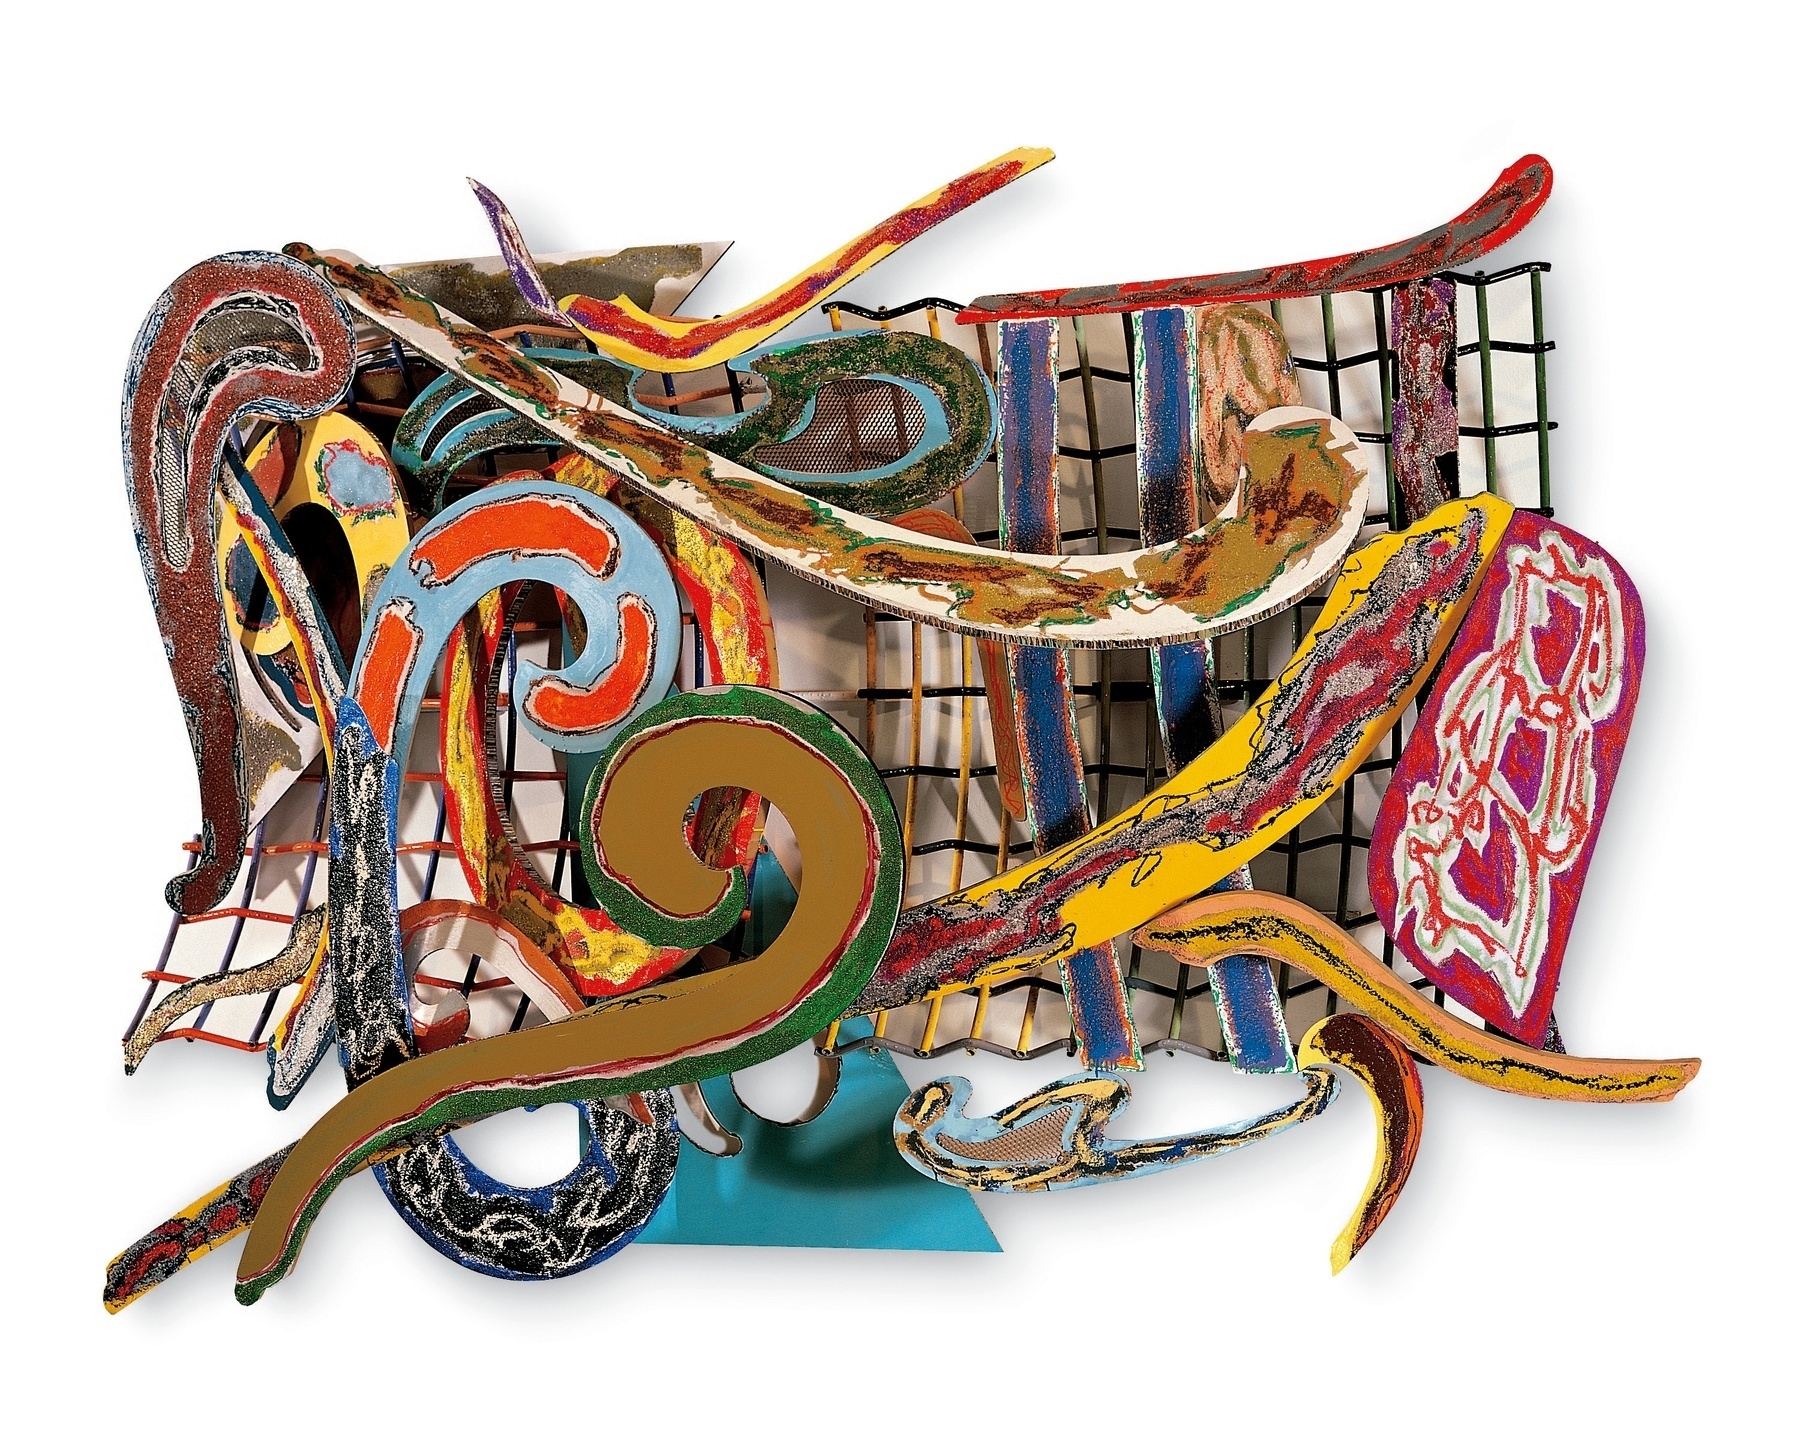 Painting/assemblage with many bright colors and shapes by Frank Stella